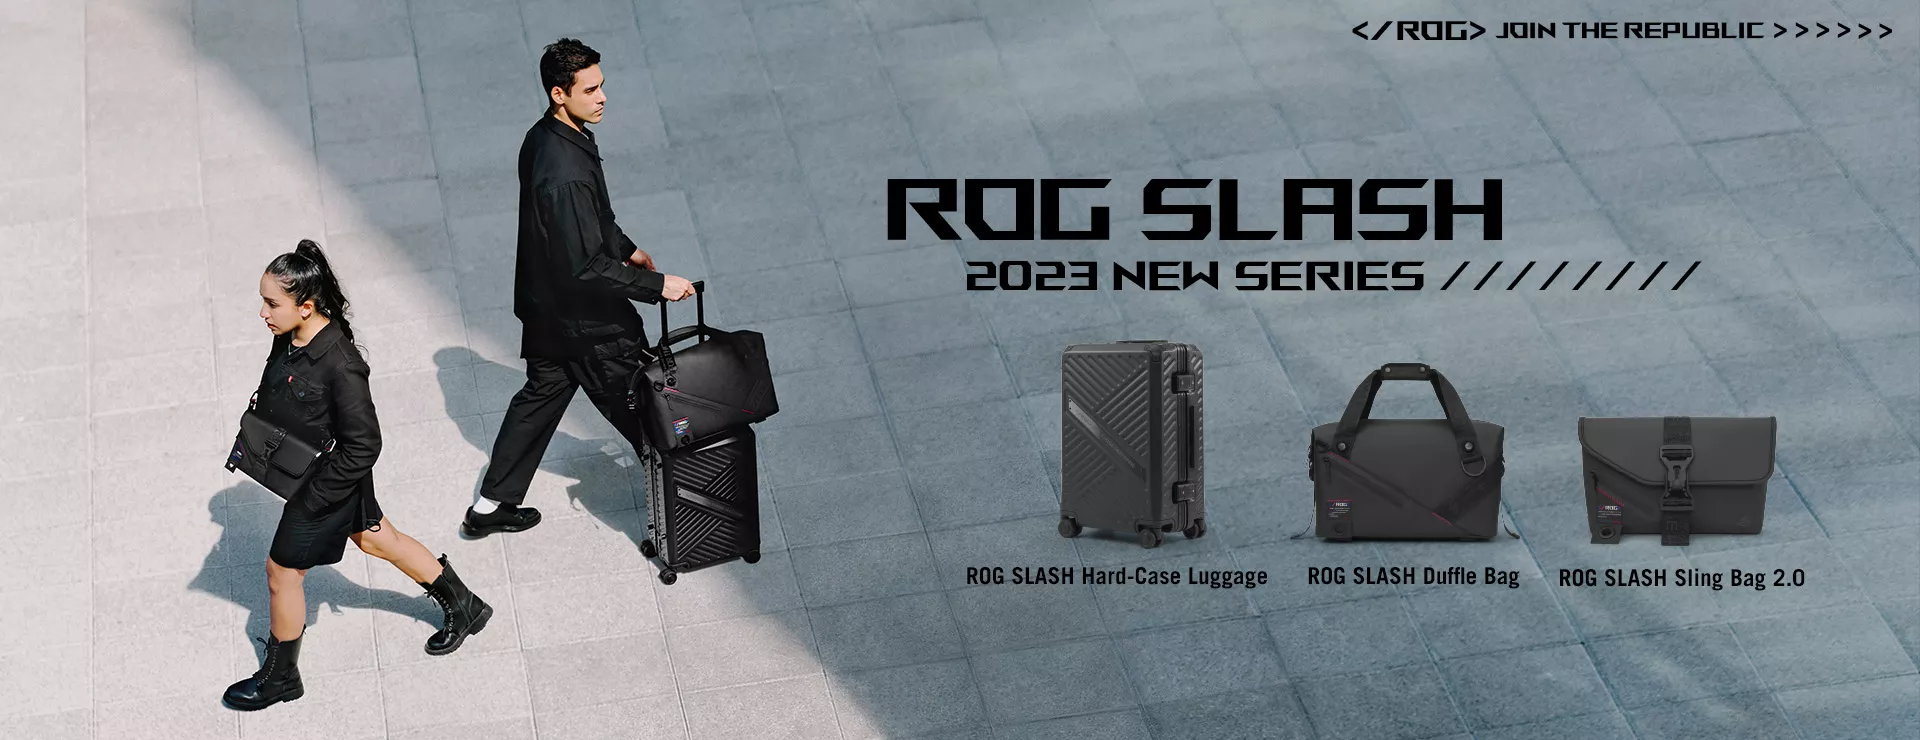 Two people passing each other on the street, with one using the ROG SLASH Sling Bag 2.0, and the other the ROG SLASH Hard Case Luggage and ROG SLASH Duffle Bag.